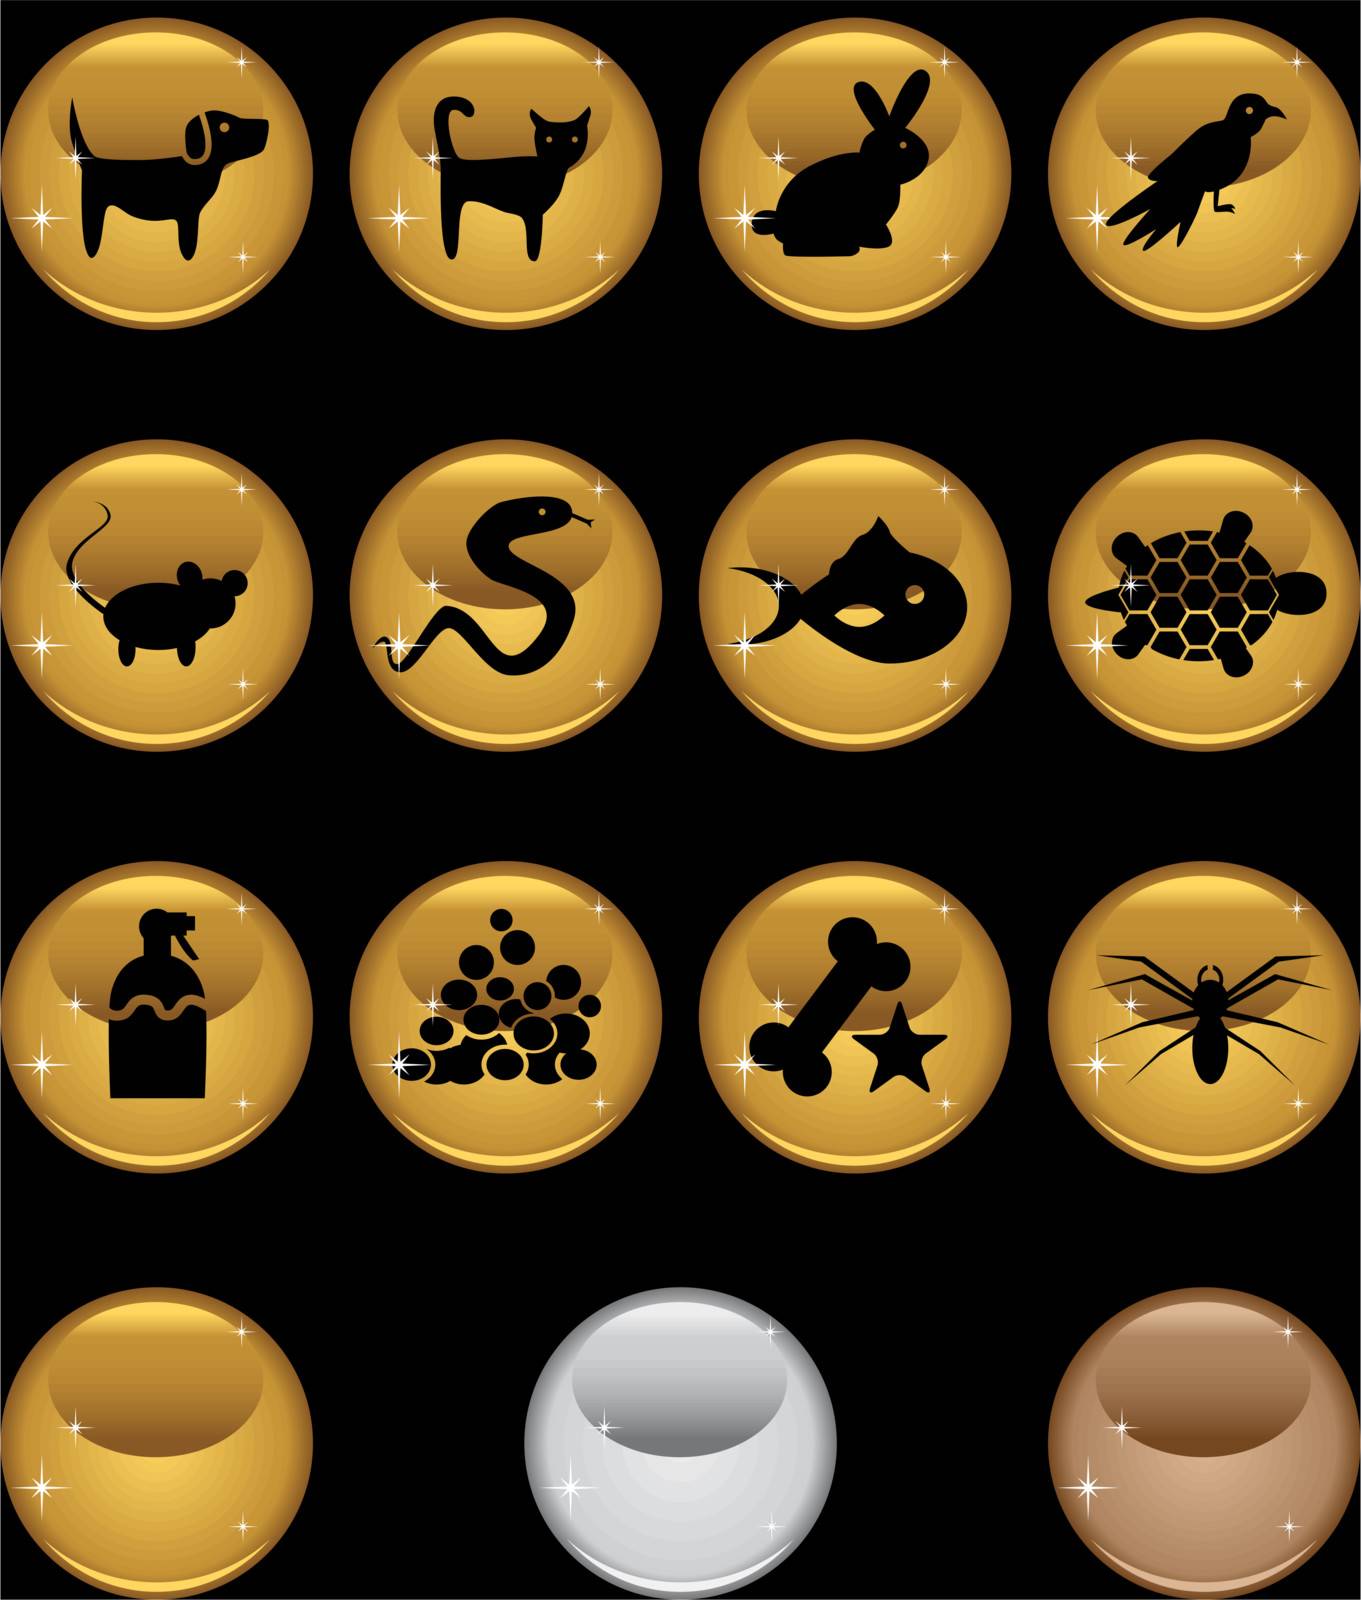 An image of pet icons.